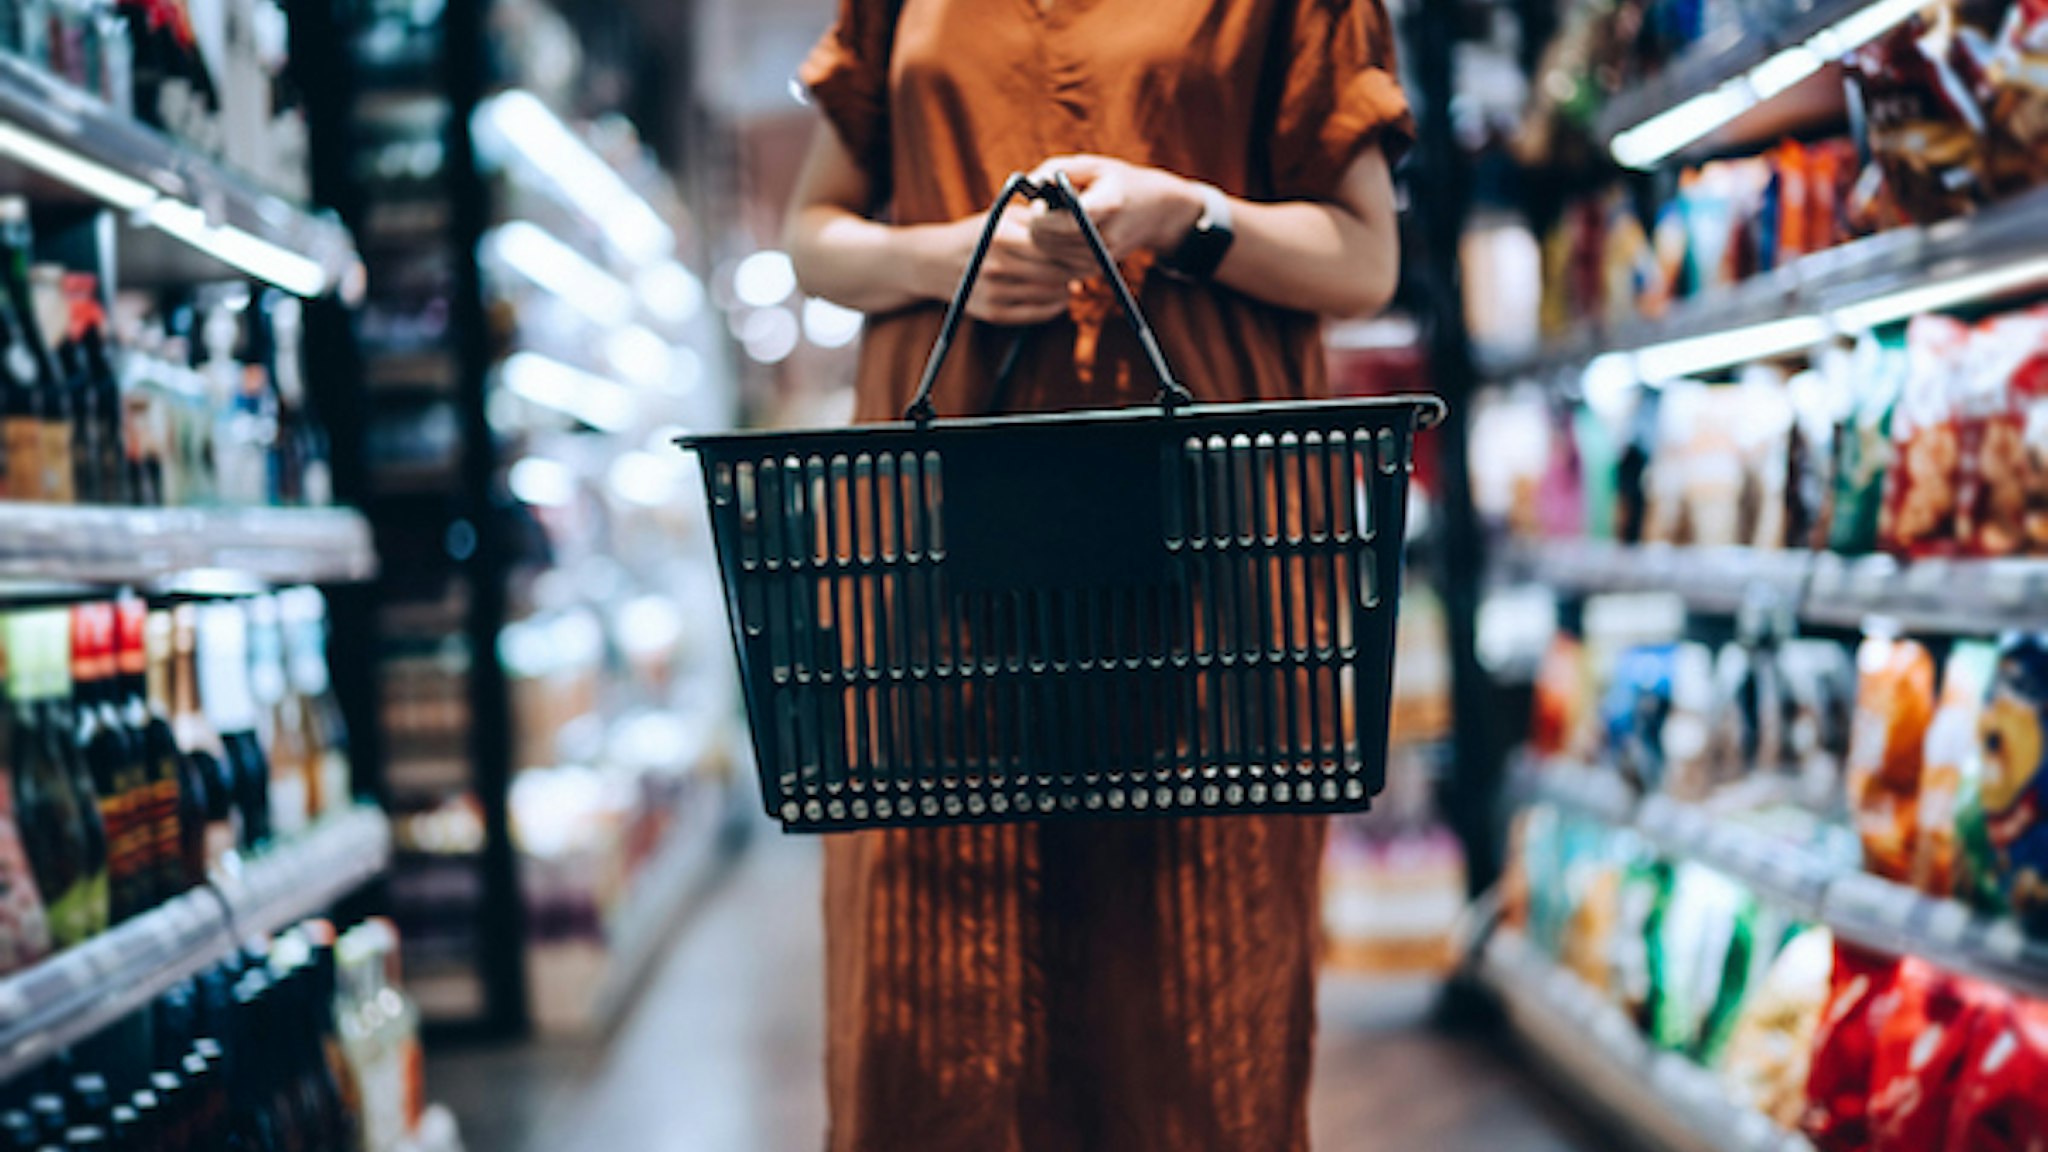 Cropped shot of young woman carrying a shopping basket, standing along the product aisle, grocery shopping for daily necessities in supermarket - stock photo Cropped shot of young woman carrying a shopping basket, standing along the product aisle, grocery shopping for daily necessities in supermarket d3sign via Getty Images